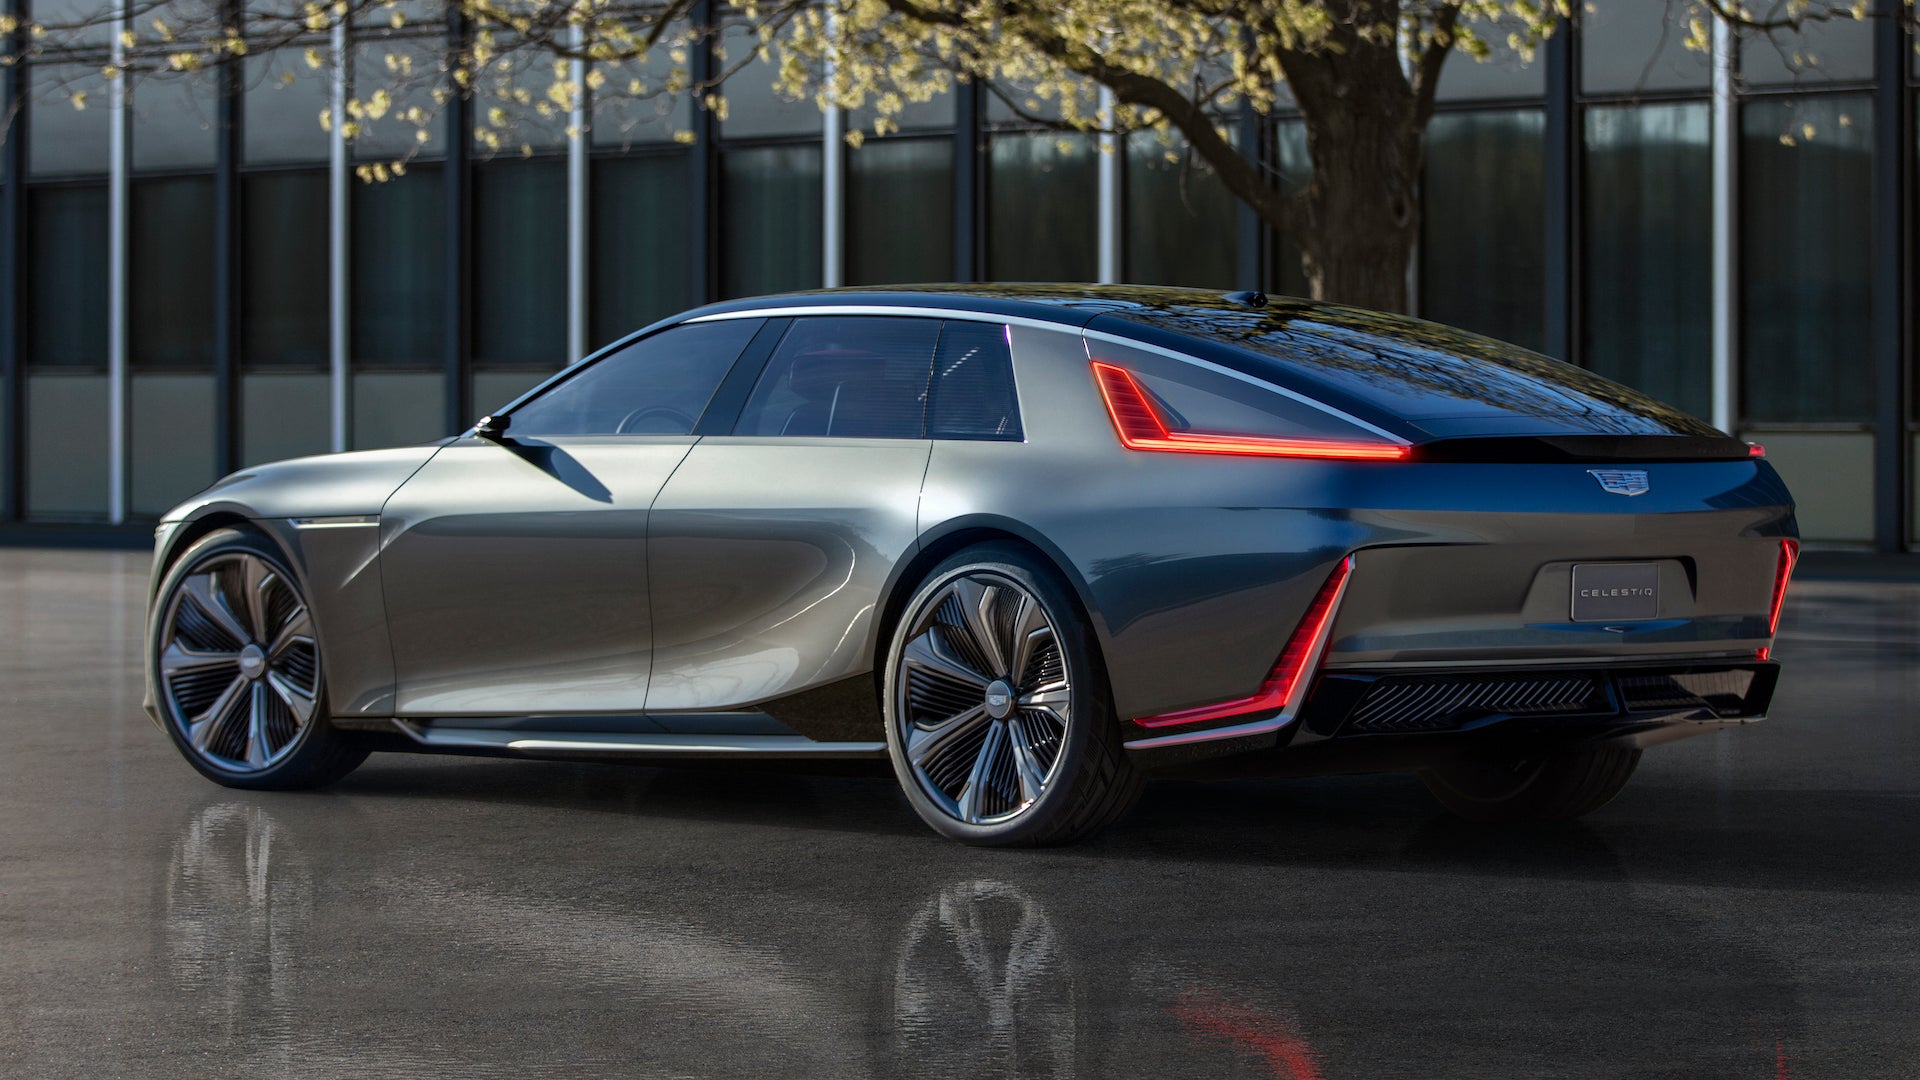 This Is What the $300K Cadillac Celestiq Electric Sedan Will Look Like